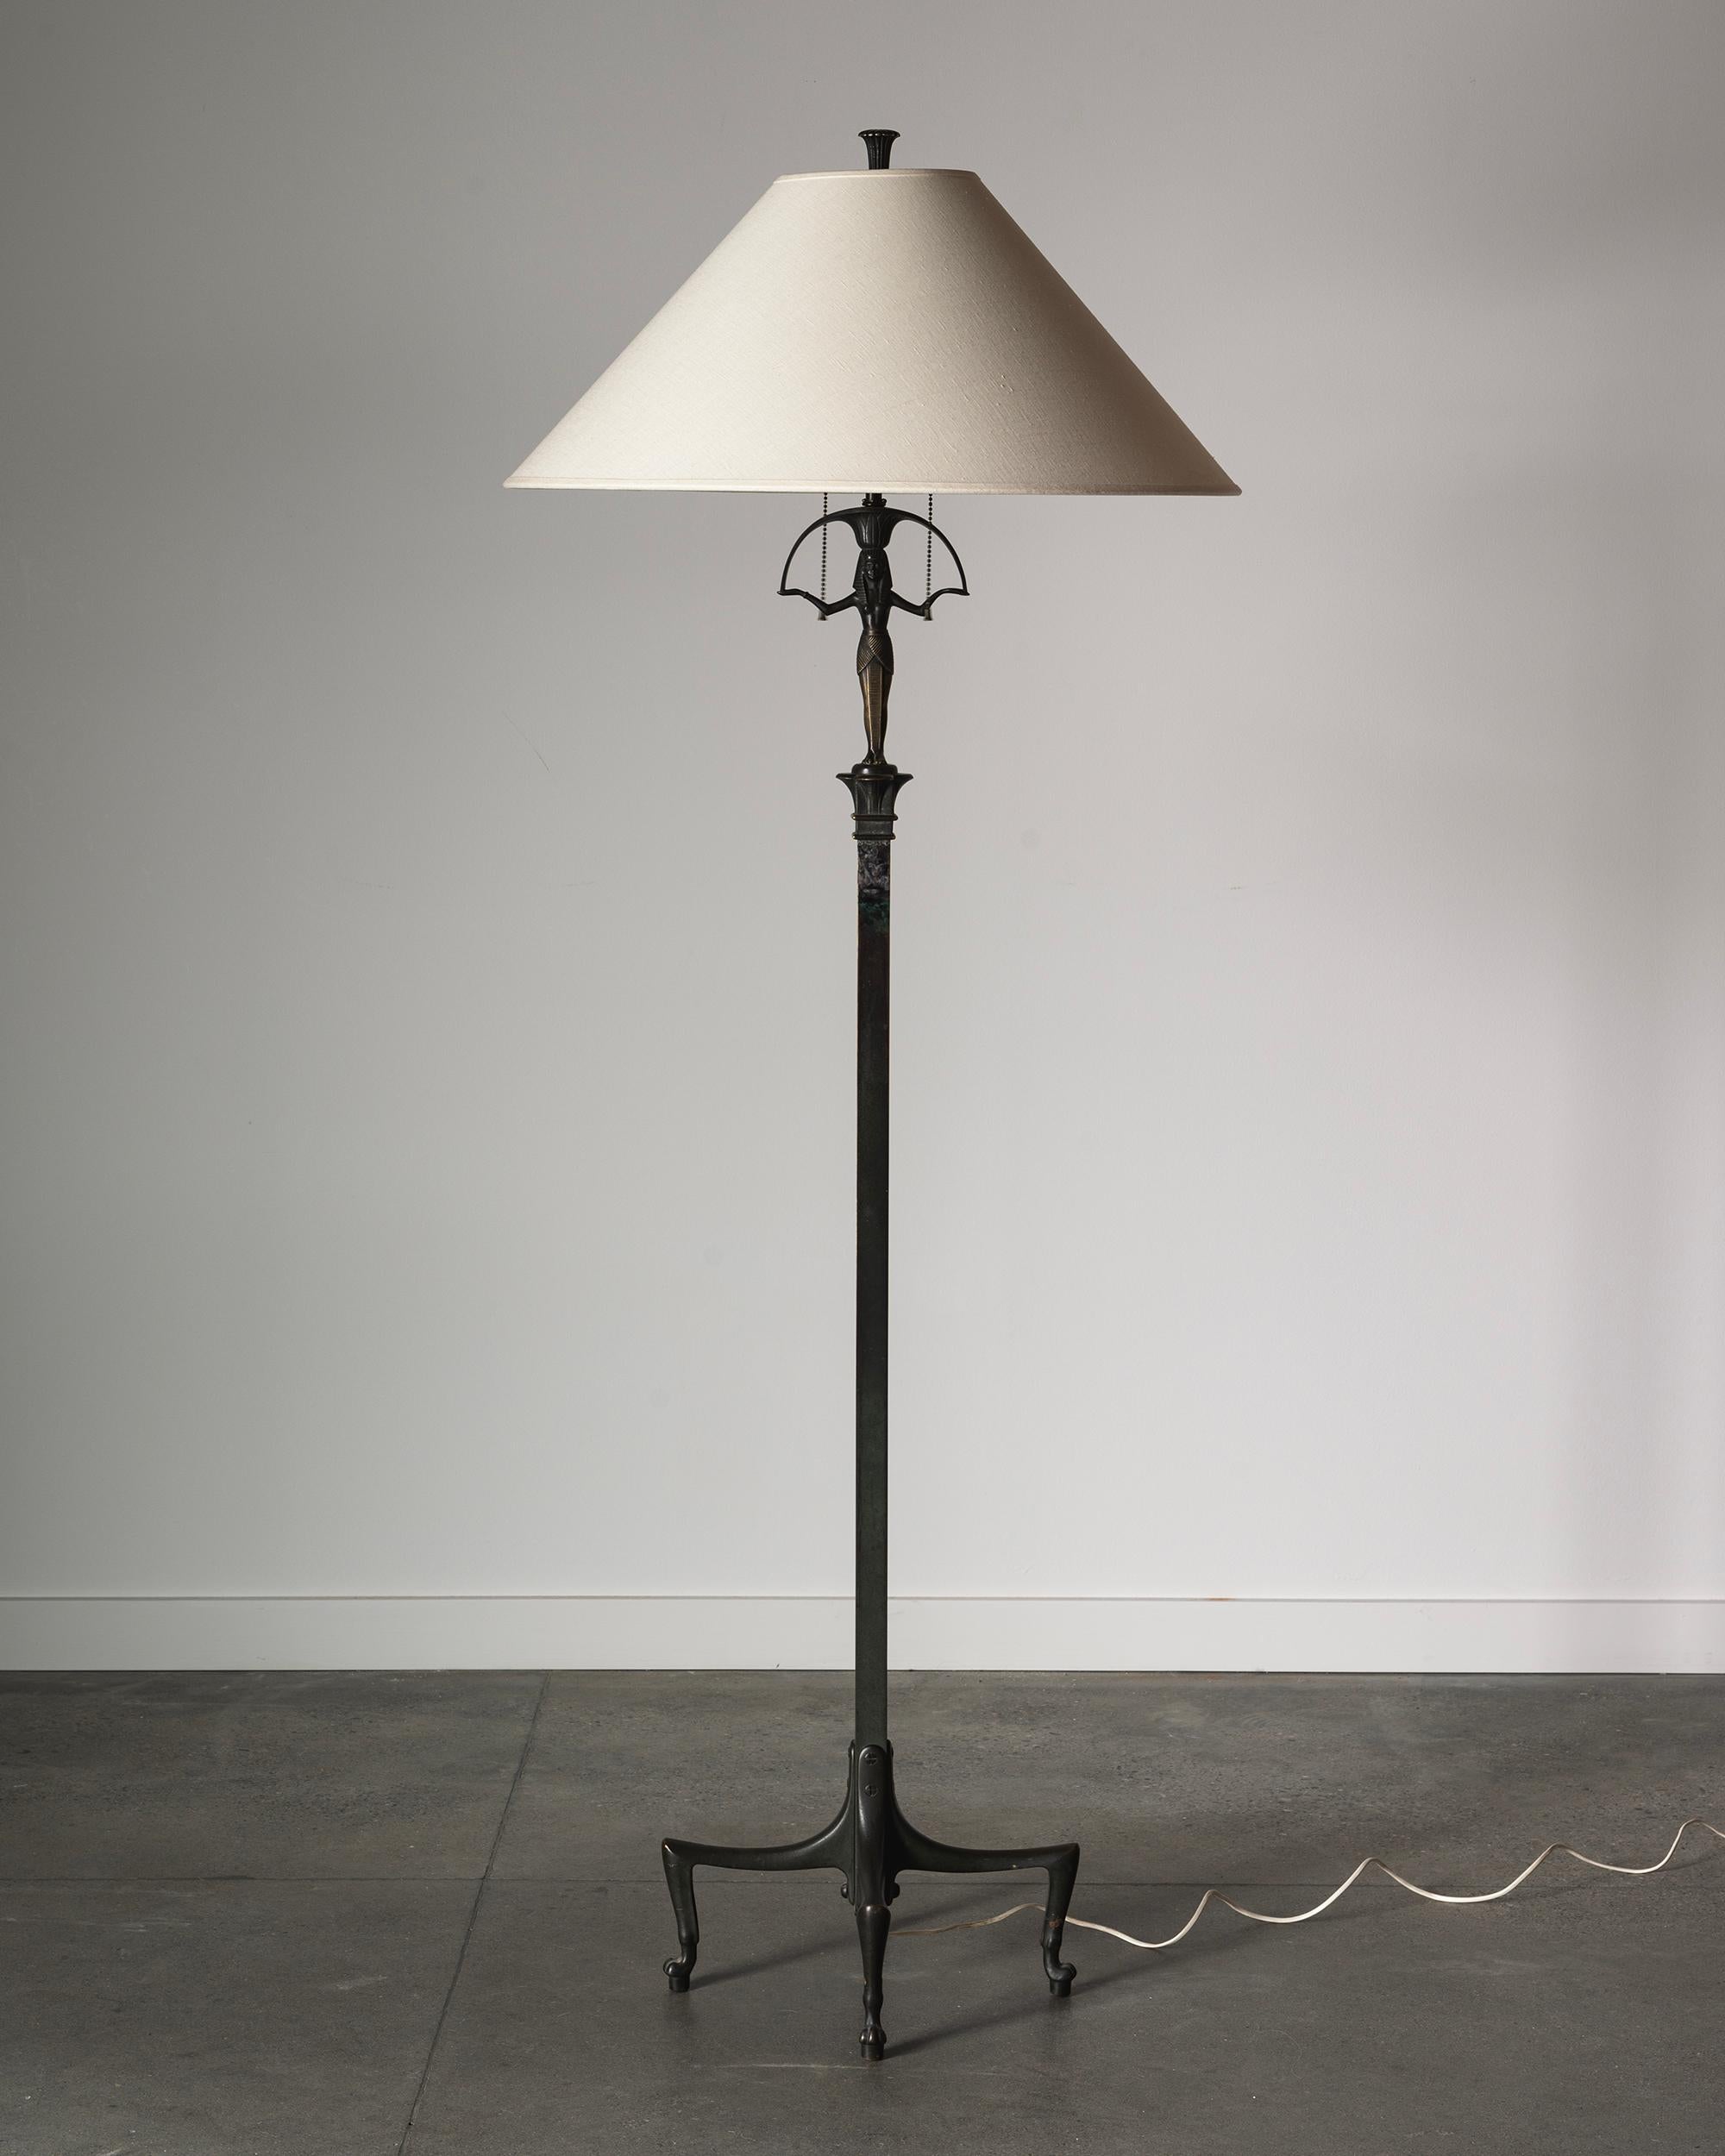 Exceptional early 20th century Art Deco (Swedish Grace) bronze floor lamp in the Egyptian taste. ca 1920 - 30s Sweden. 